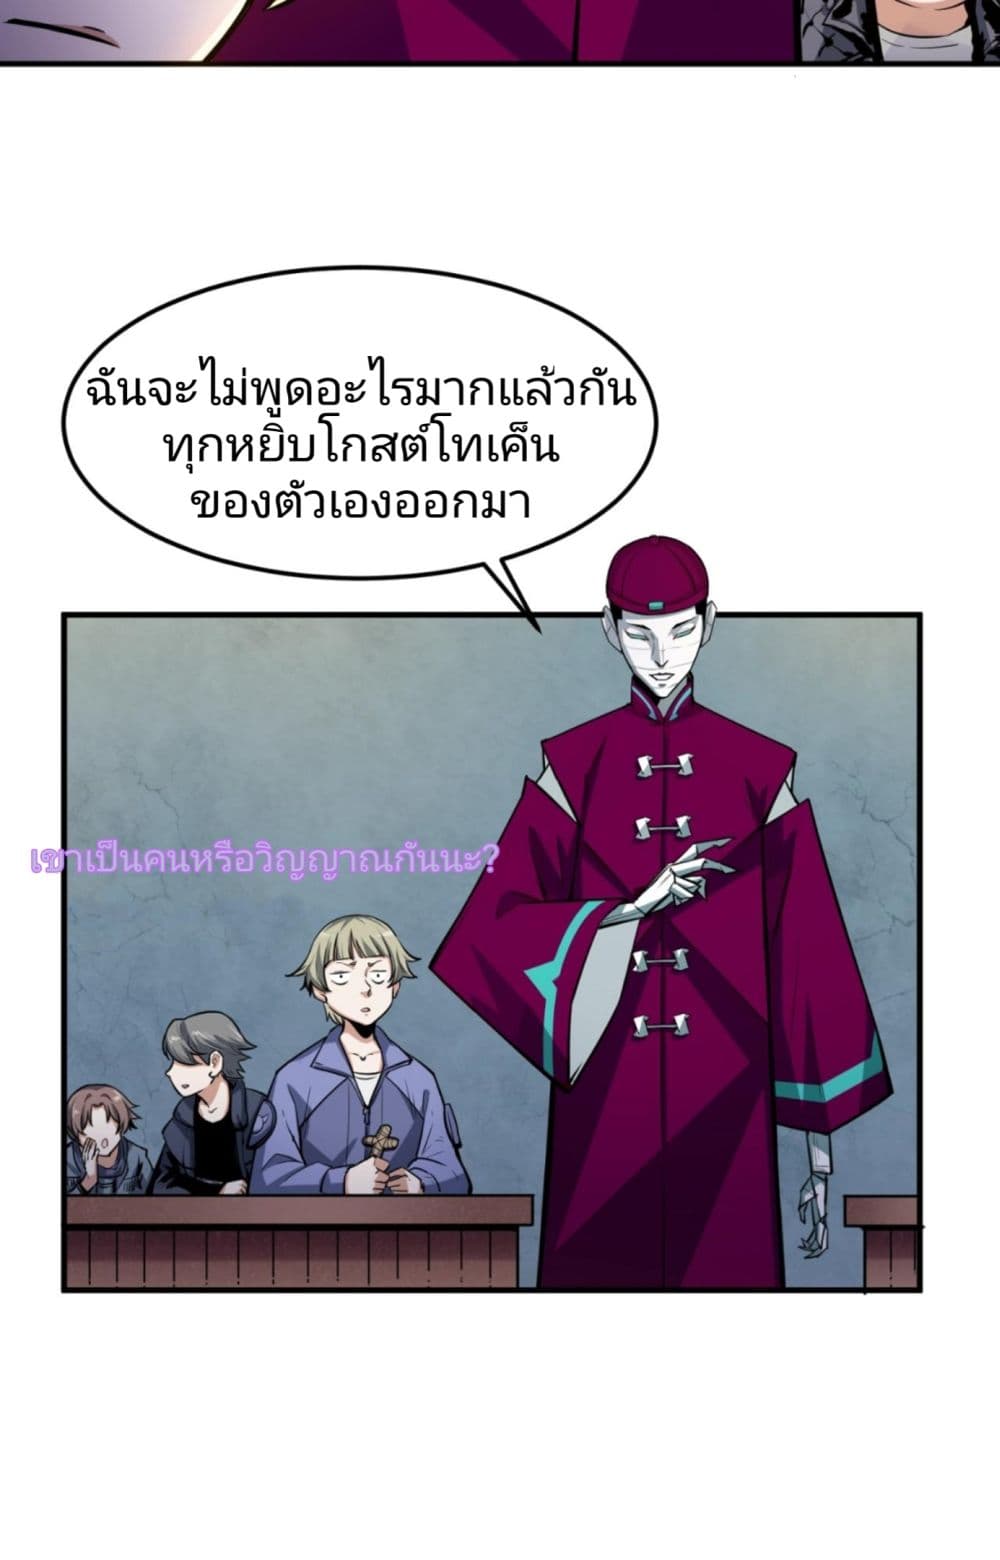 The Age of Ghost Spirits à¸à¸­à¸à¸à¸µà¹ 1 (20)